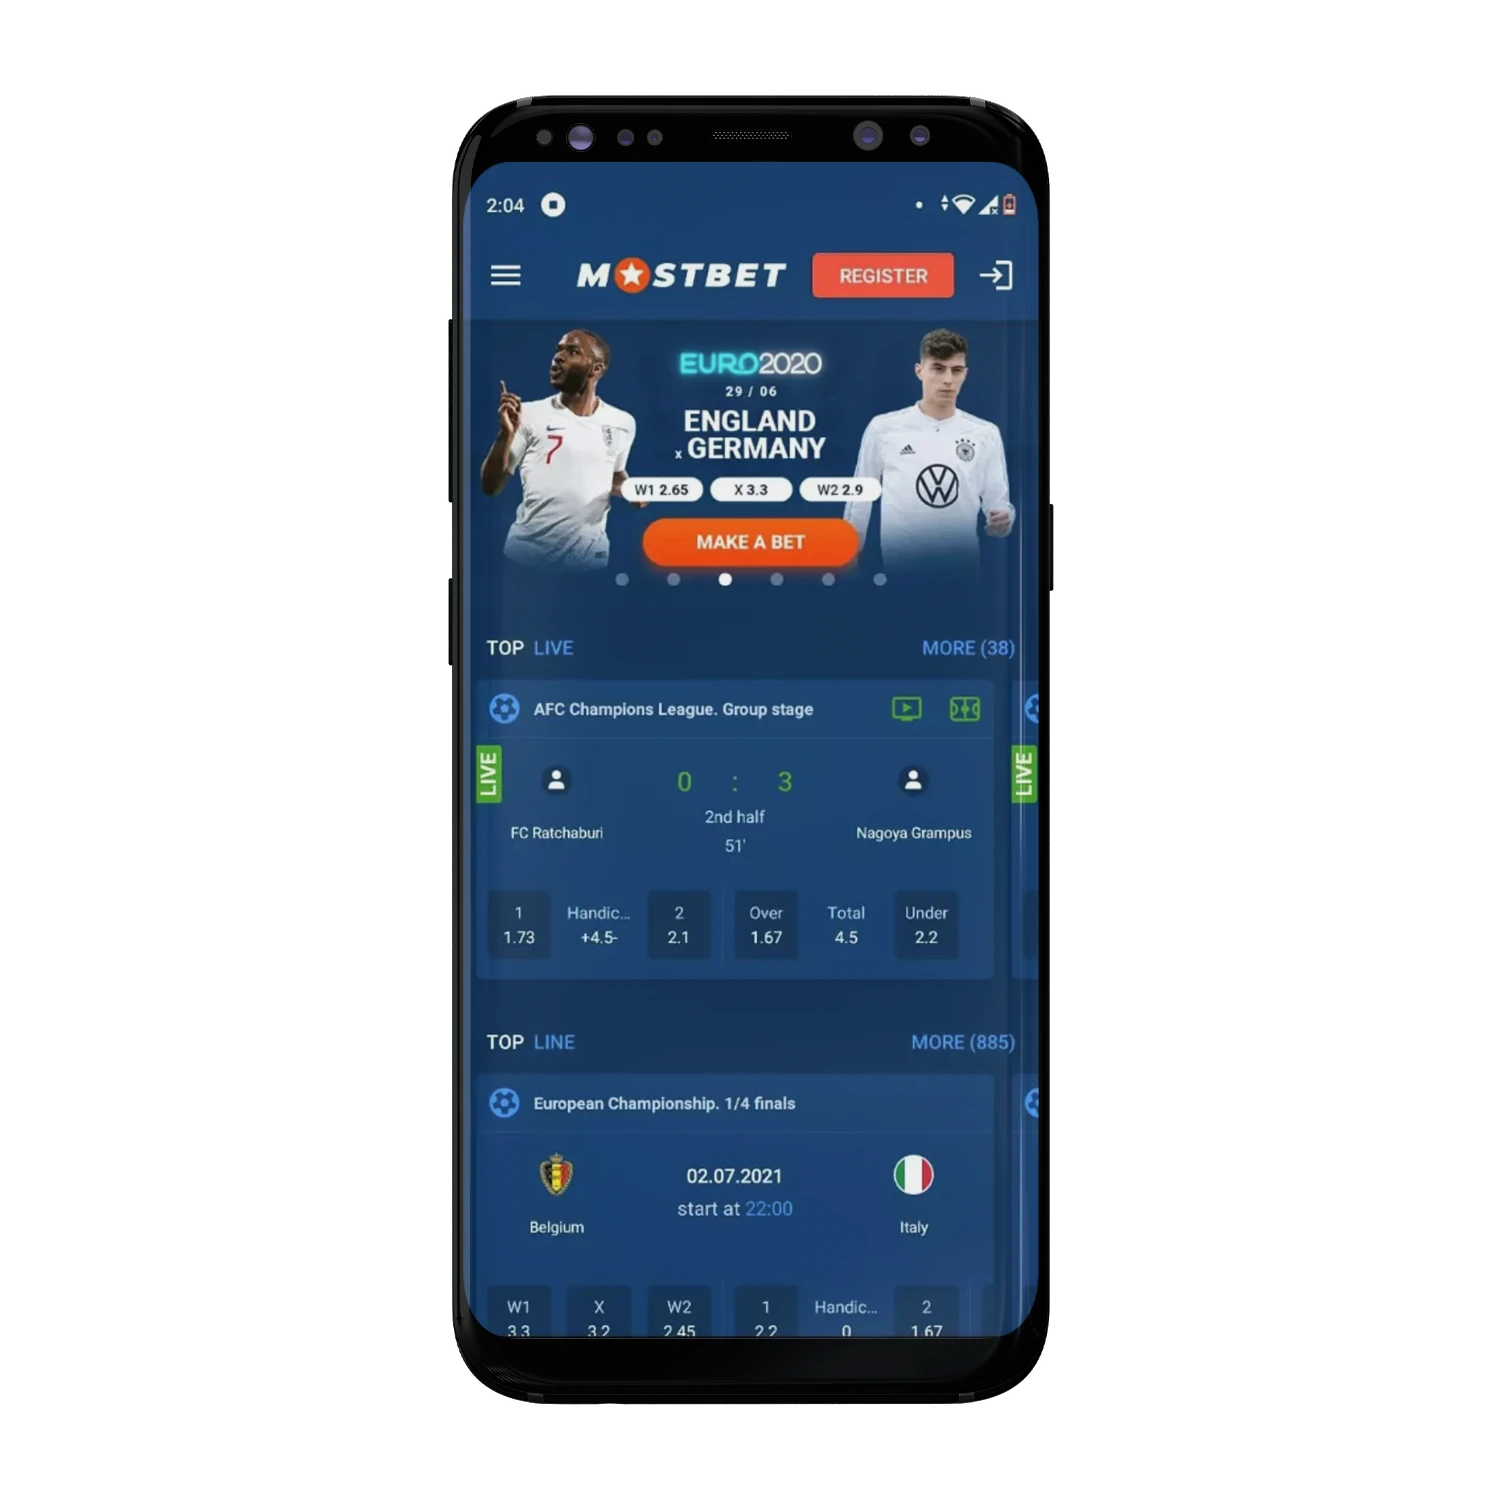 The Mostbet app is available for downloading on Android smartphones.